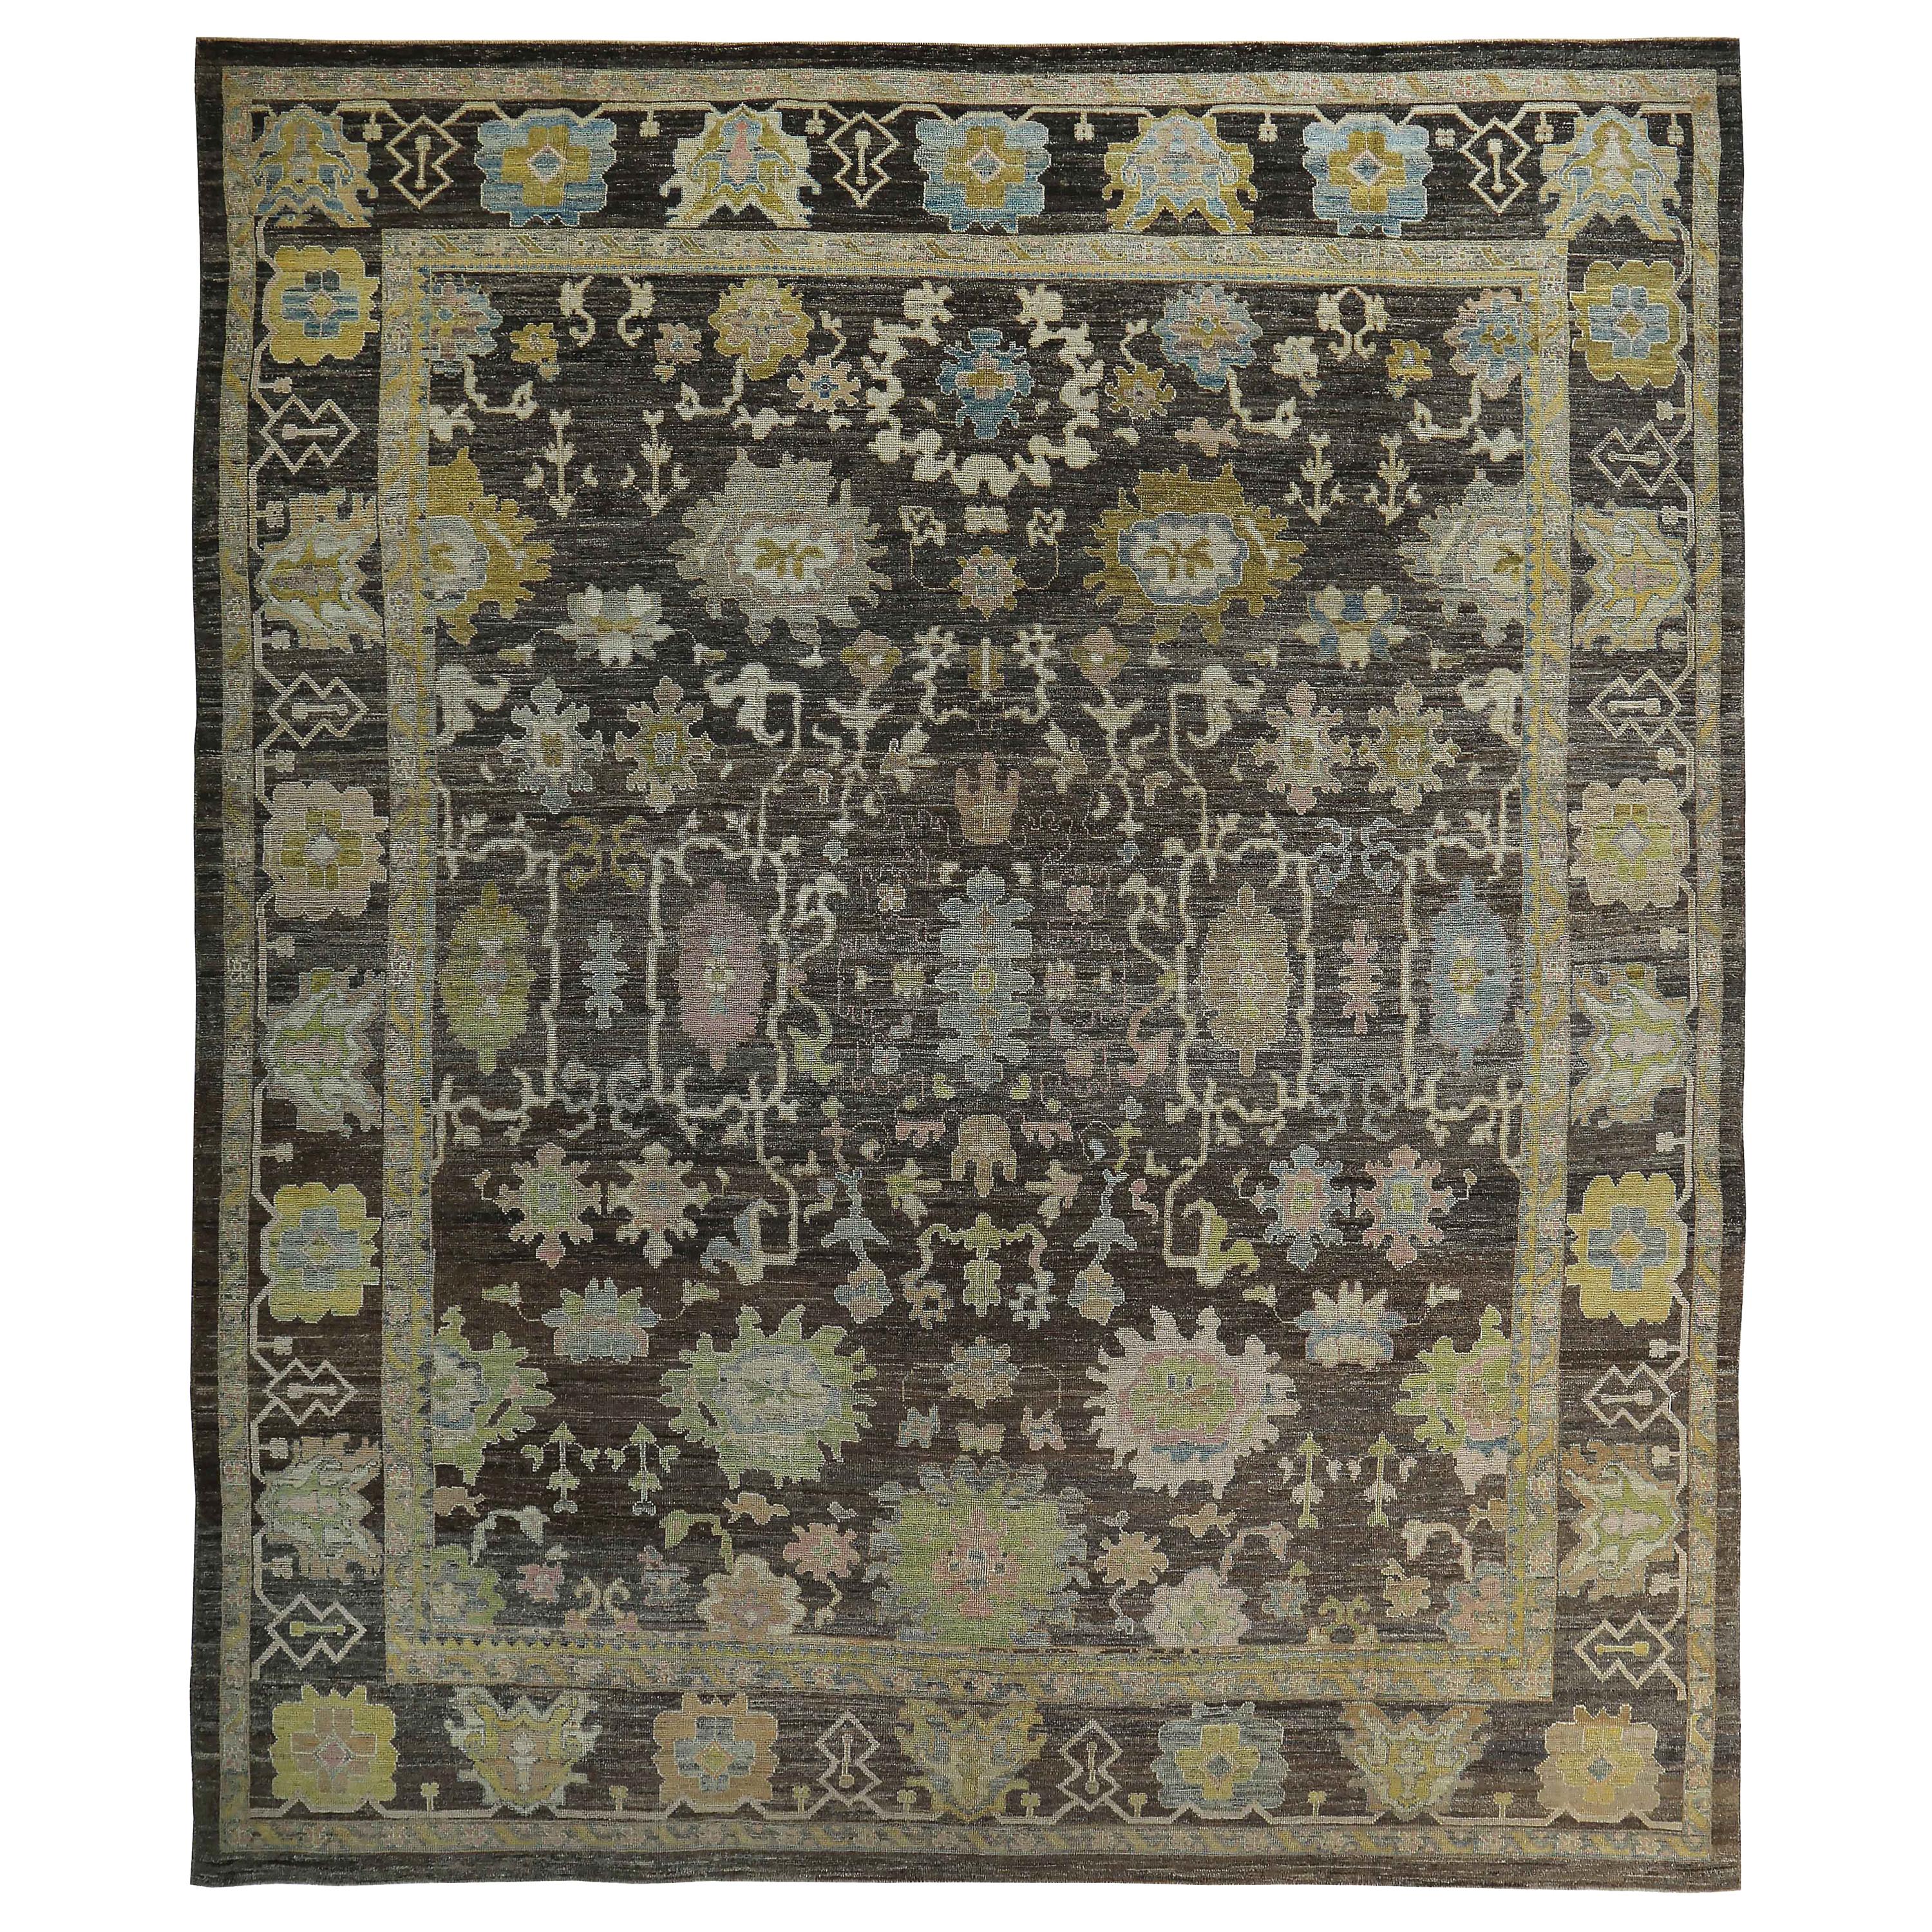 New Turkish Oushak Rug in Black and Brown with Colorful Floral Patterns For Sale